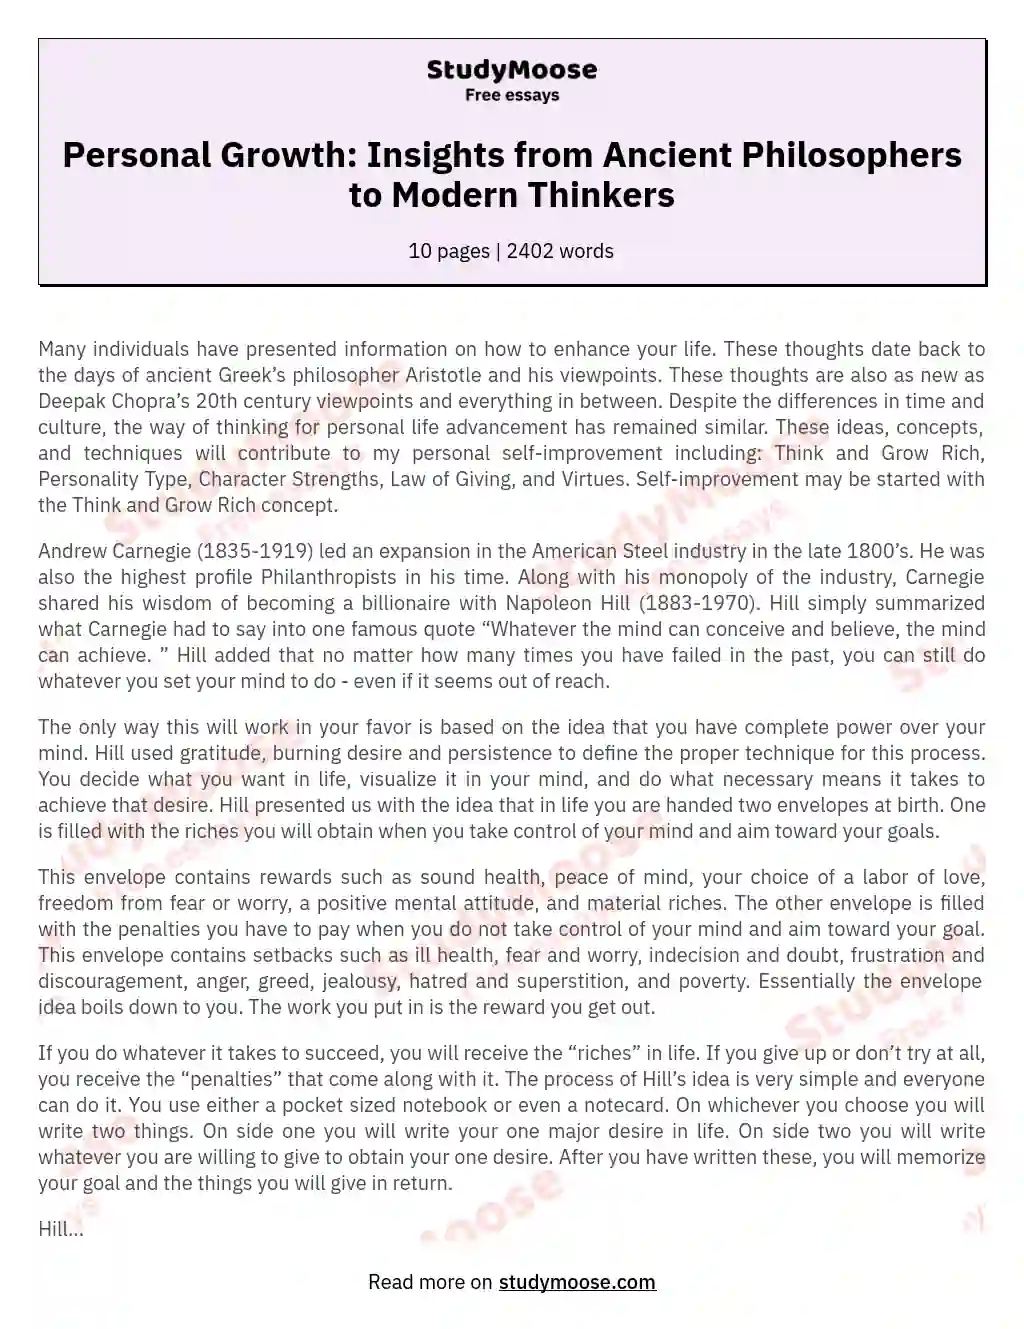 Personal Growth: Insights from Ancient Philosophers to Modern Thinkers essay